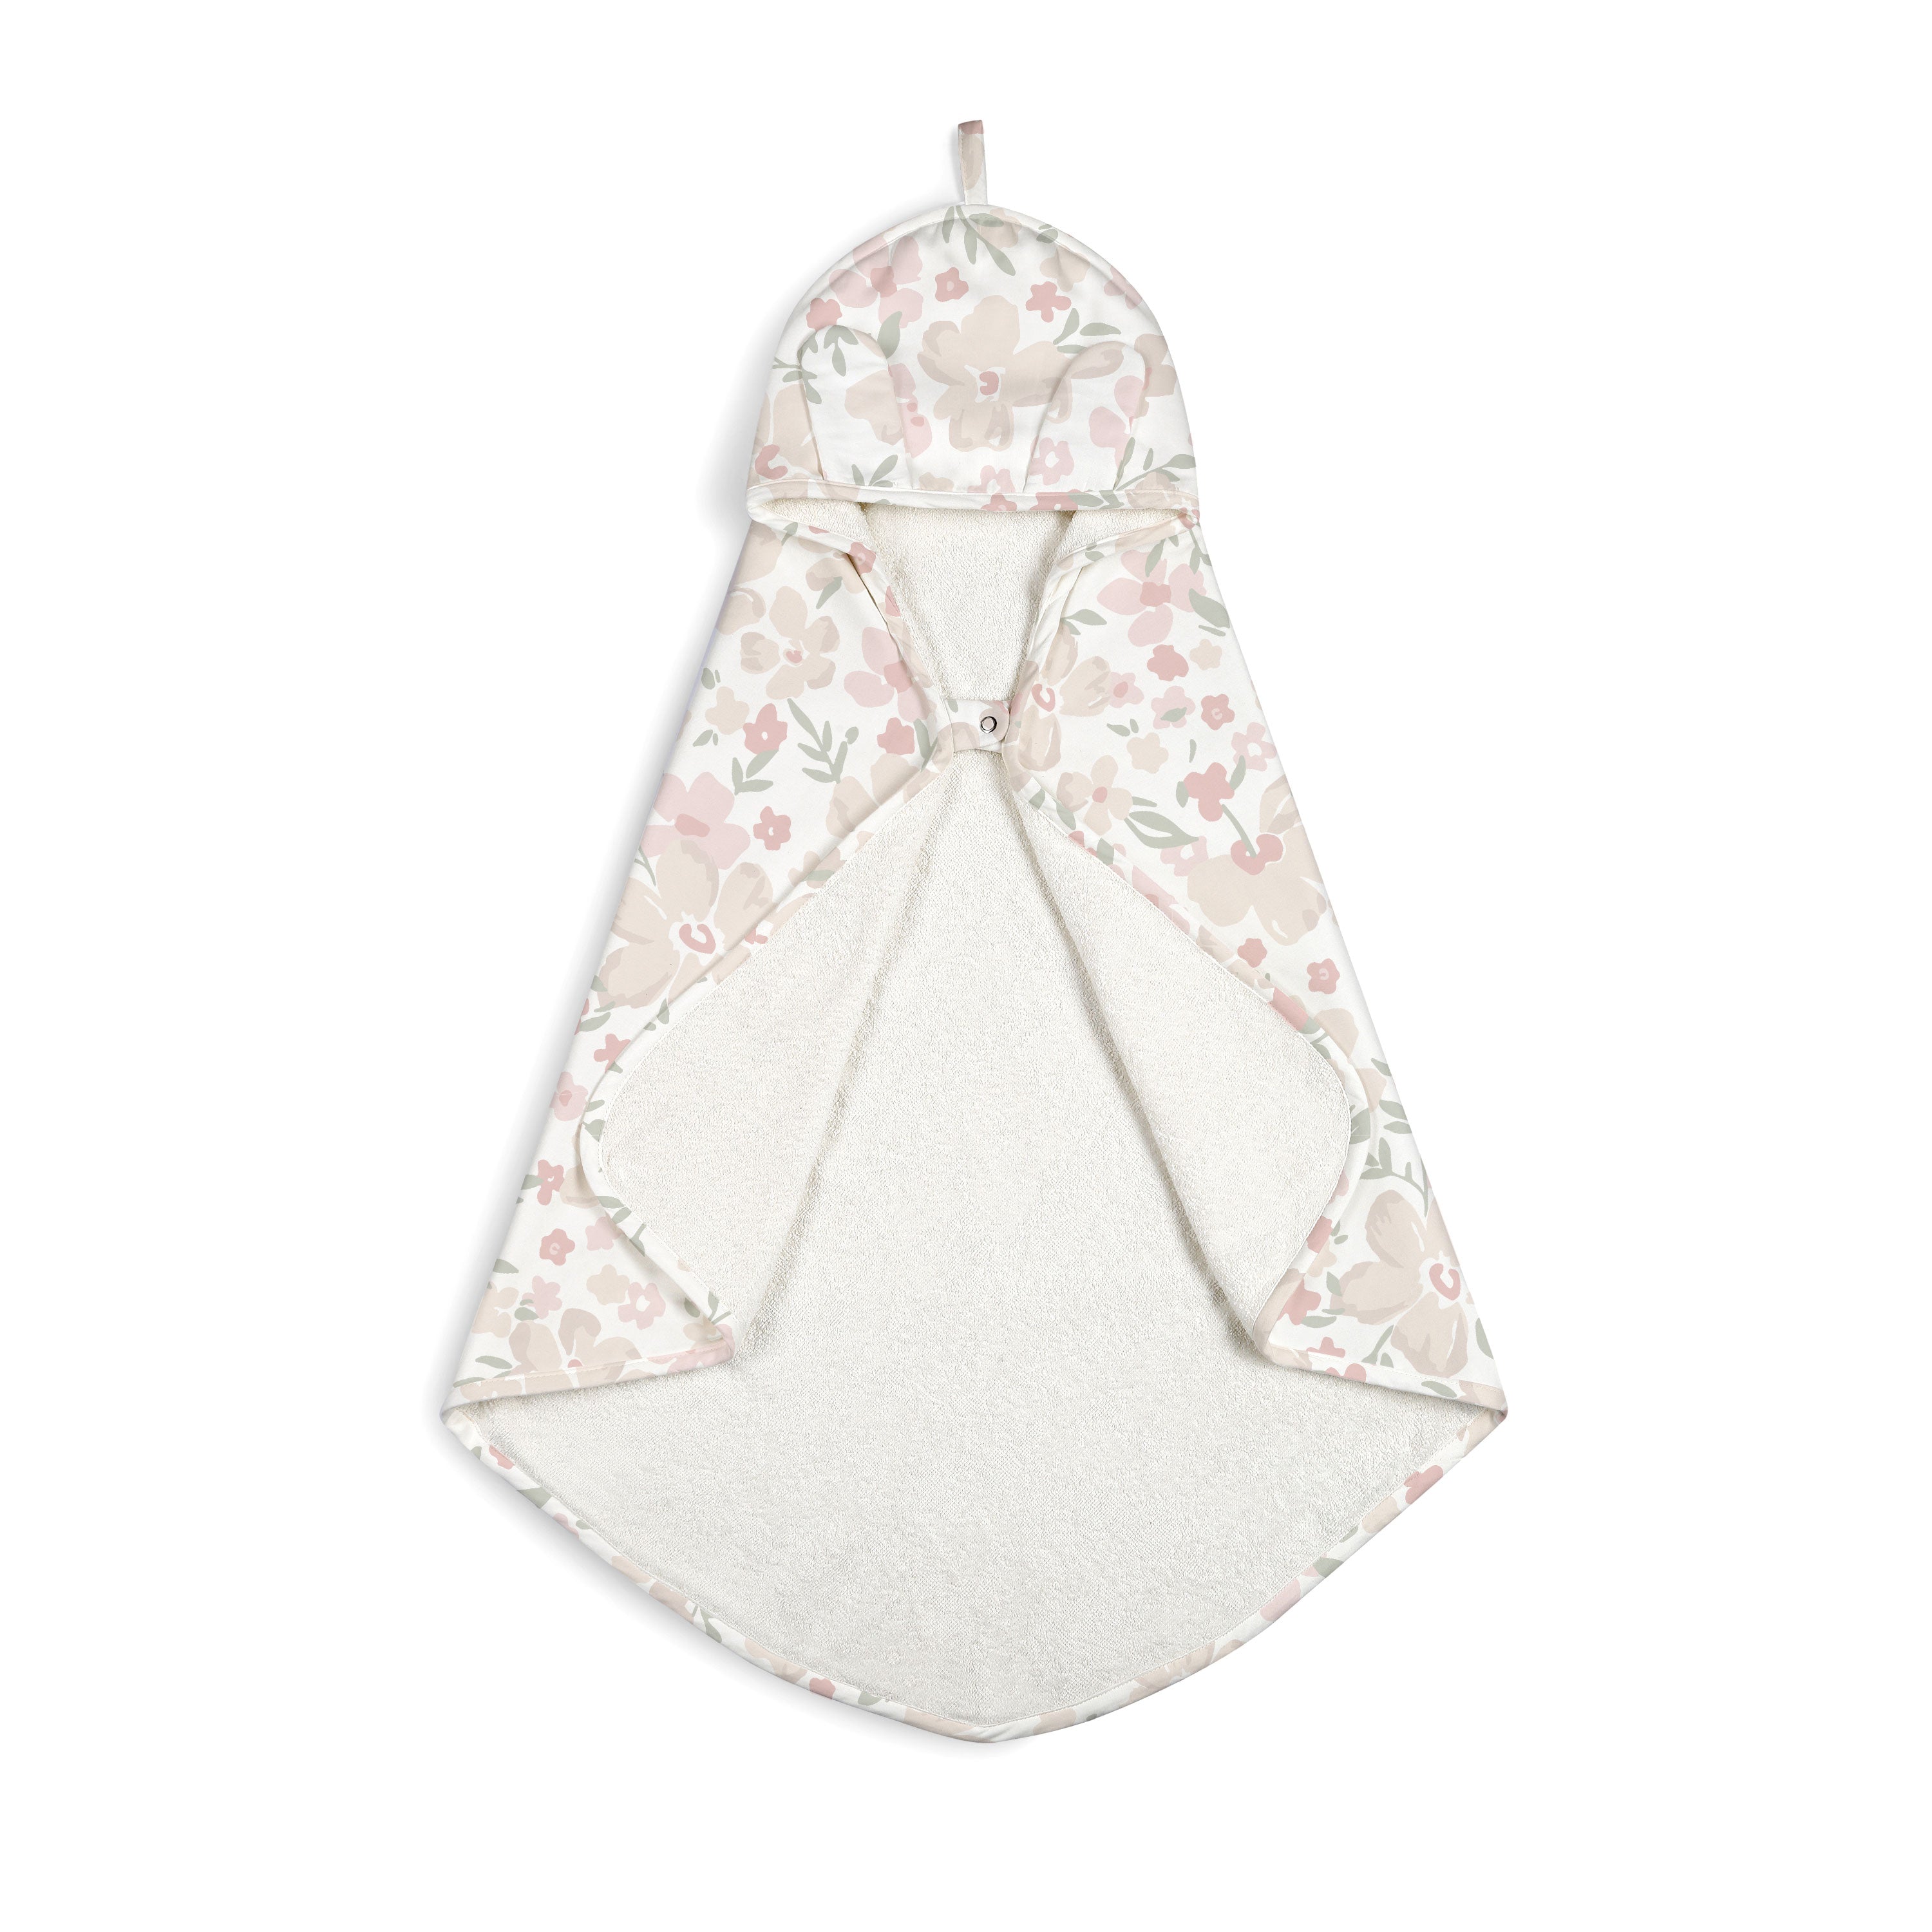 A Makemake Organics Organic Cotton Hooded Baby Towel & Poncho - Blossom with a floral pattern in pink and beige colors, displayed against a white background. the blanket is designed for wrapping a newborn, featuring a zipper for easy access.